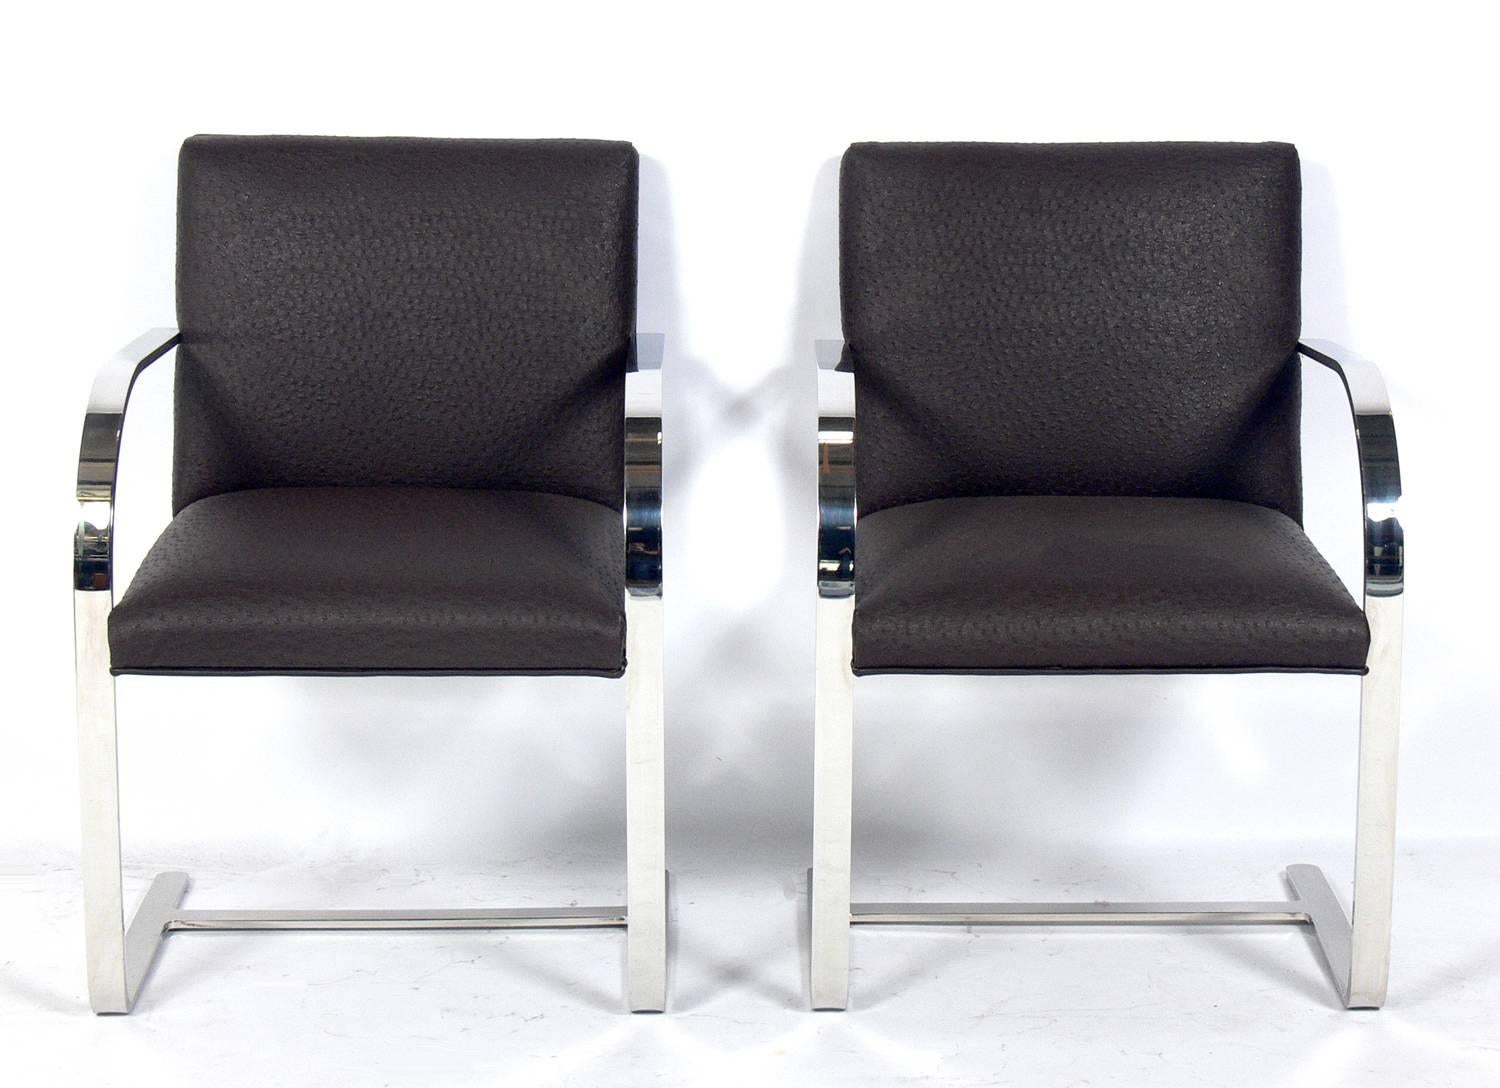 Set of four Brno chrome dining chairs after Mies van der Rohe, American, circa 1970s. These chairs are currently being reupholstered and can be completed in your fabric. The price noted below includes upholstery in your fabric.